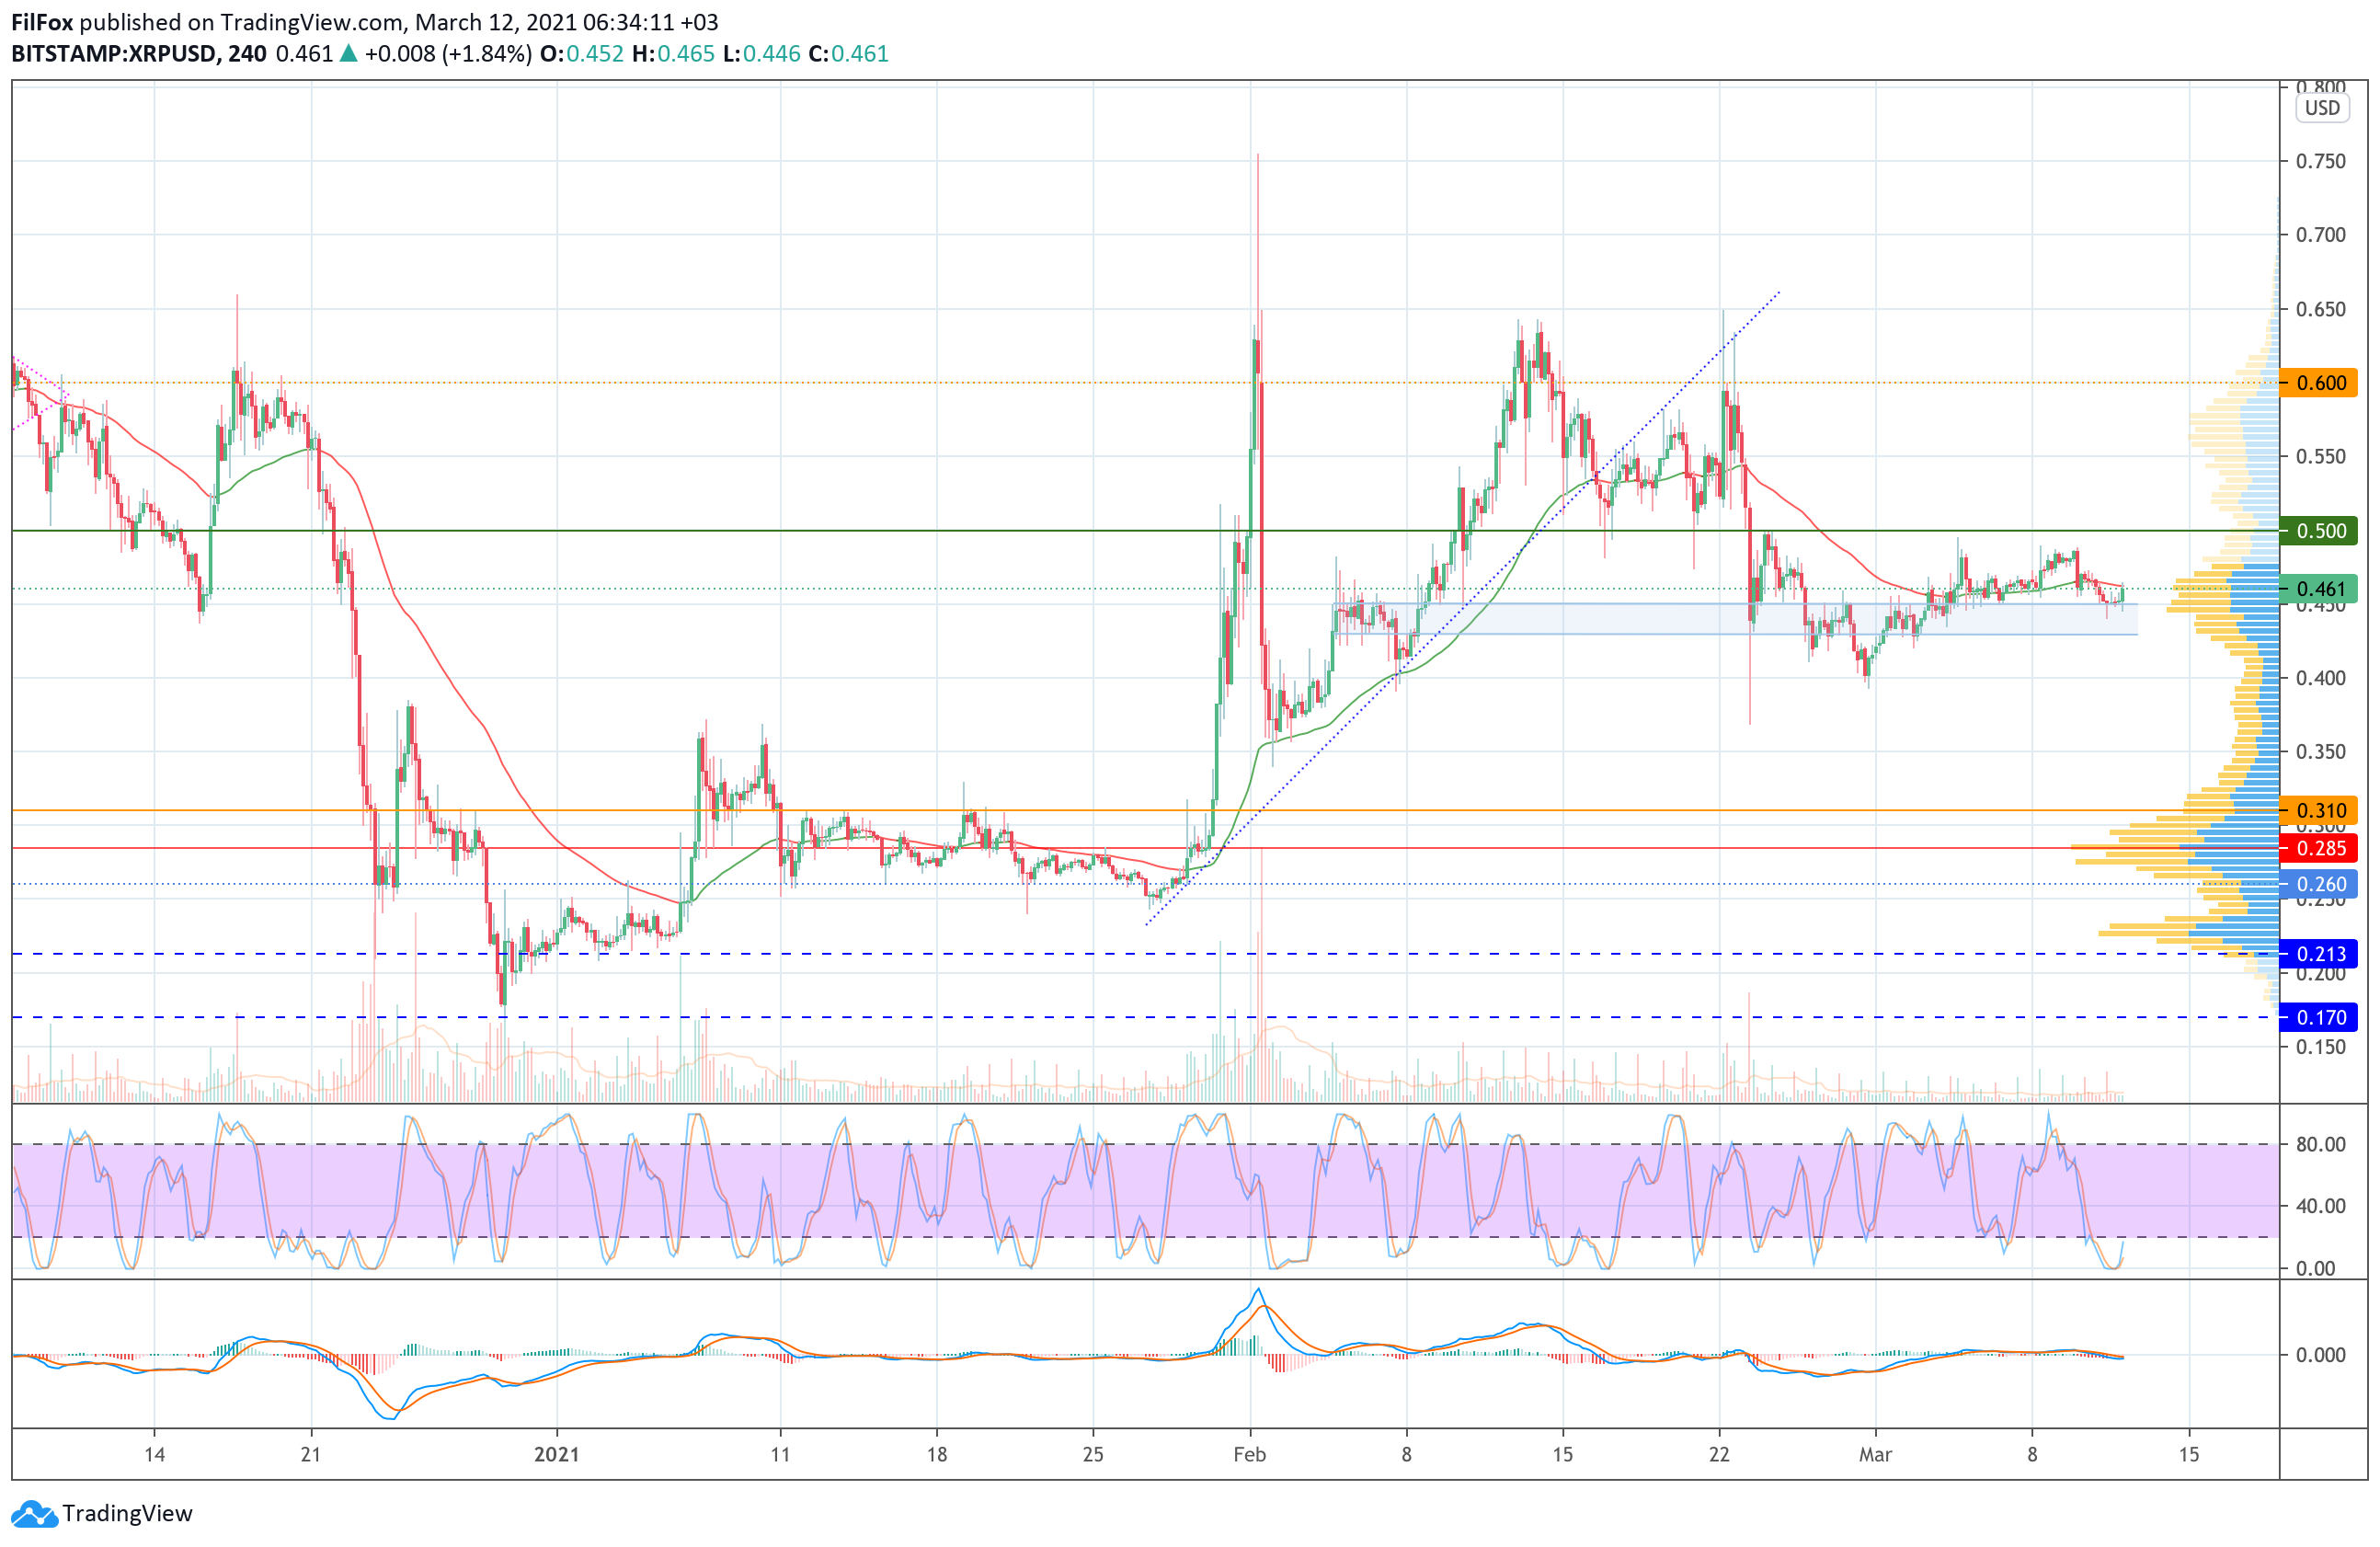 Analysis of the prices of Bitcoin, Ethereum, XRP for 03/12/2021